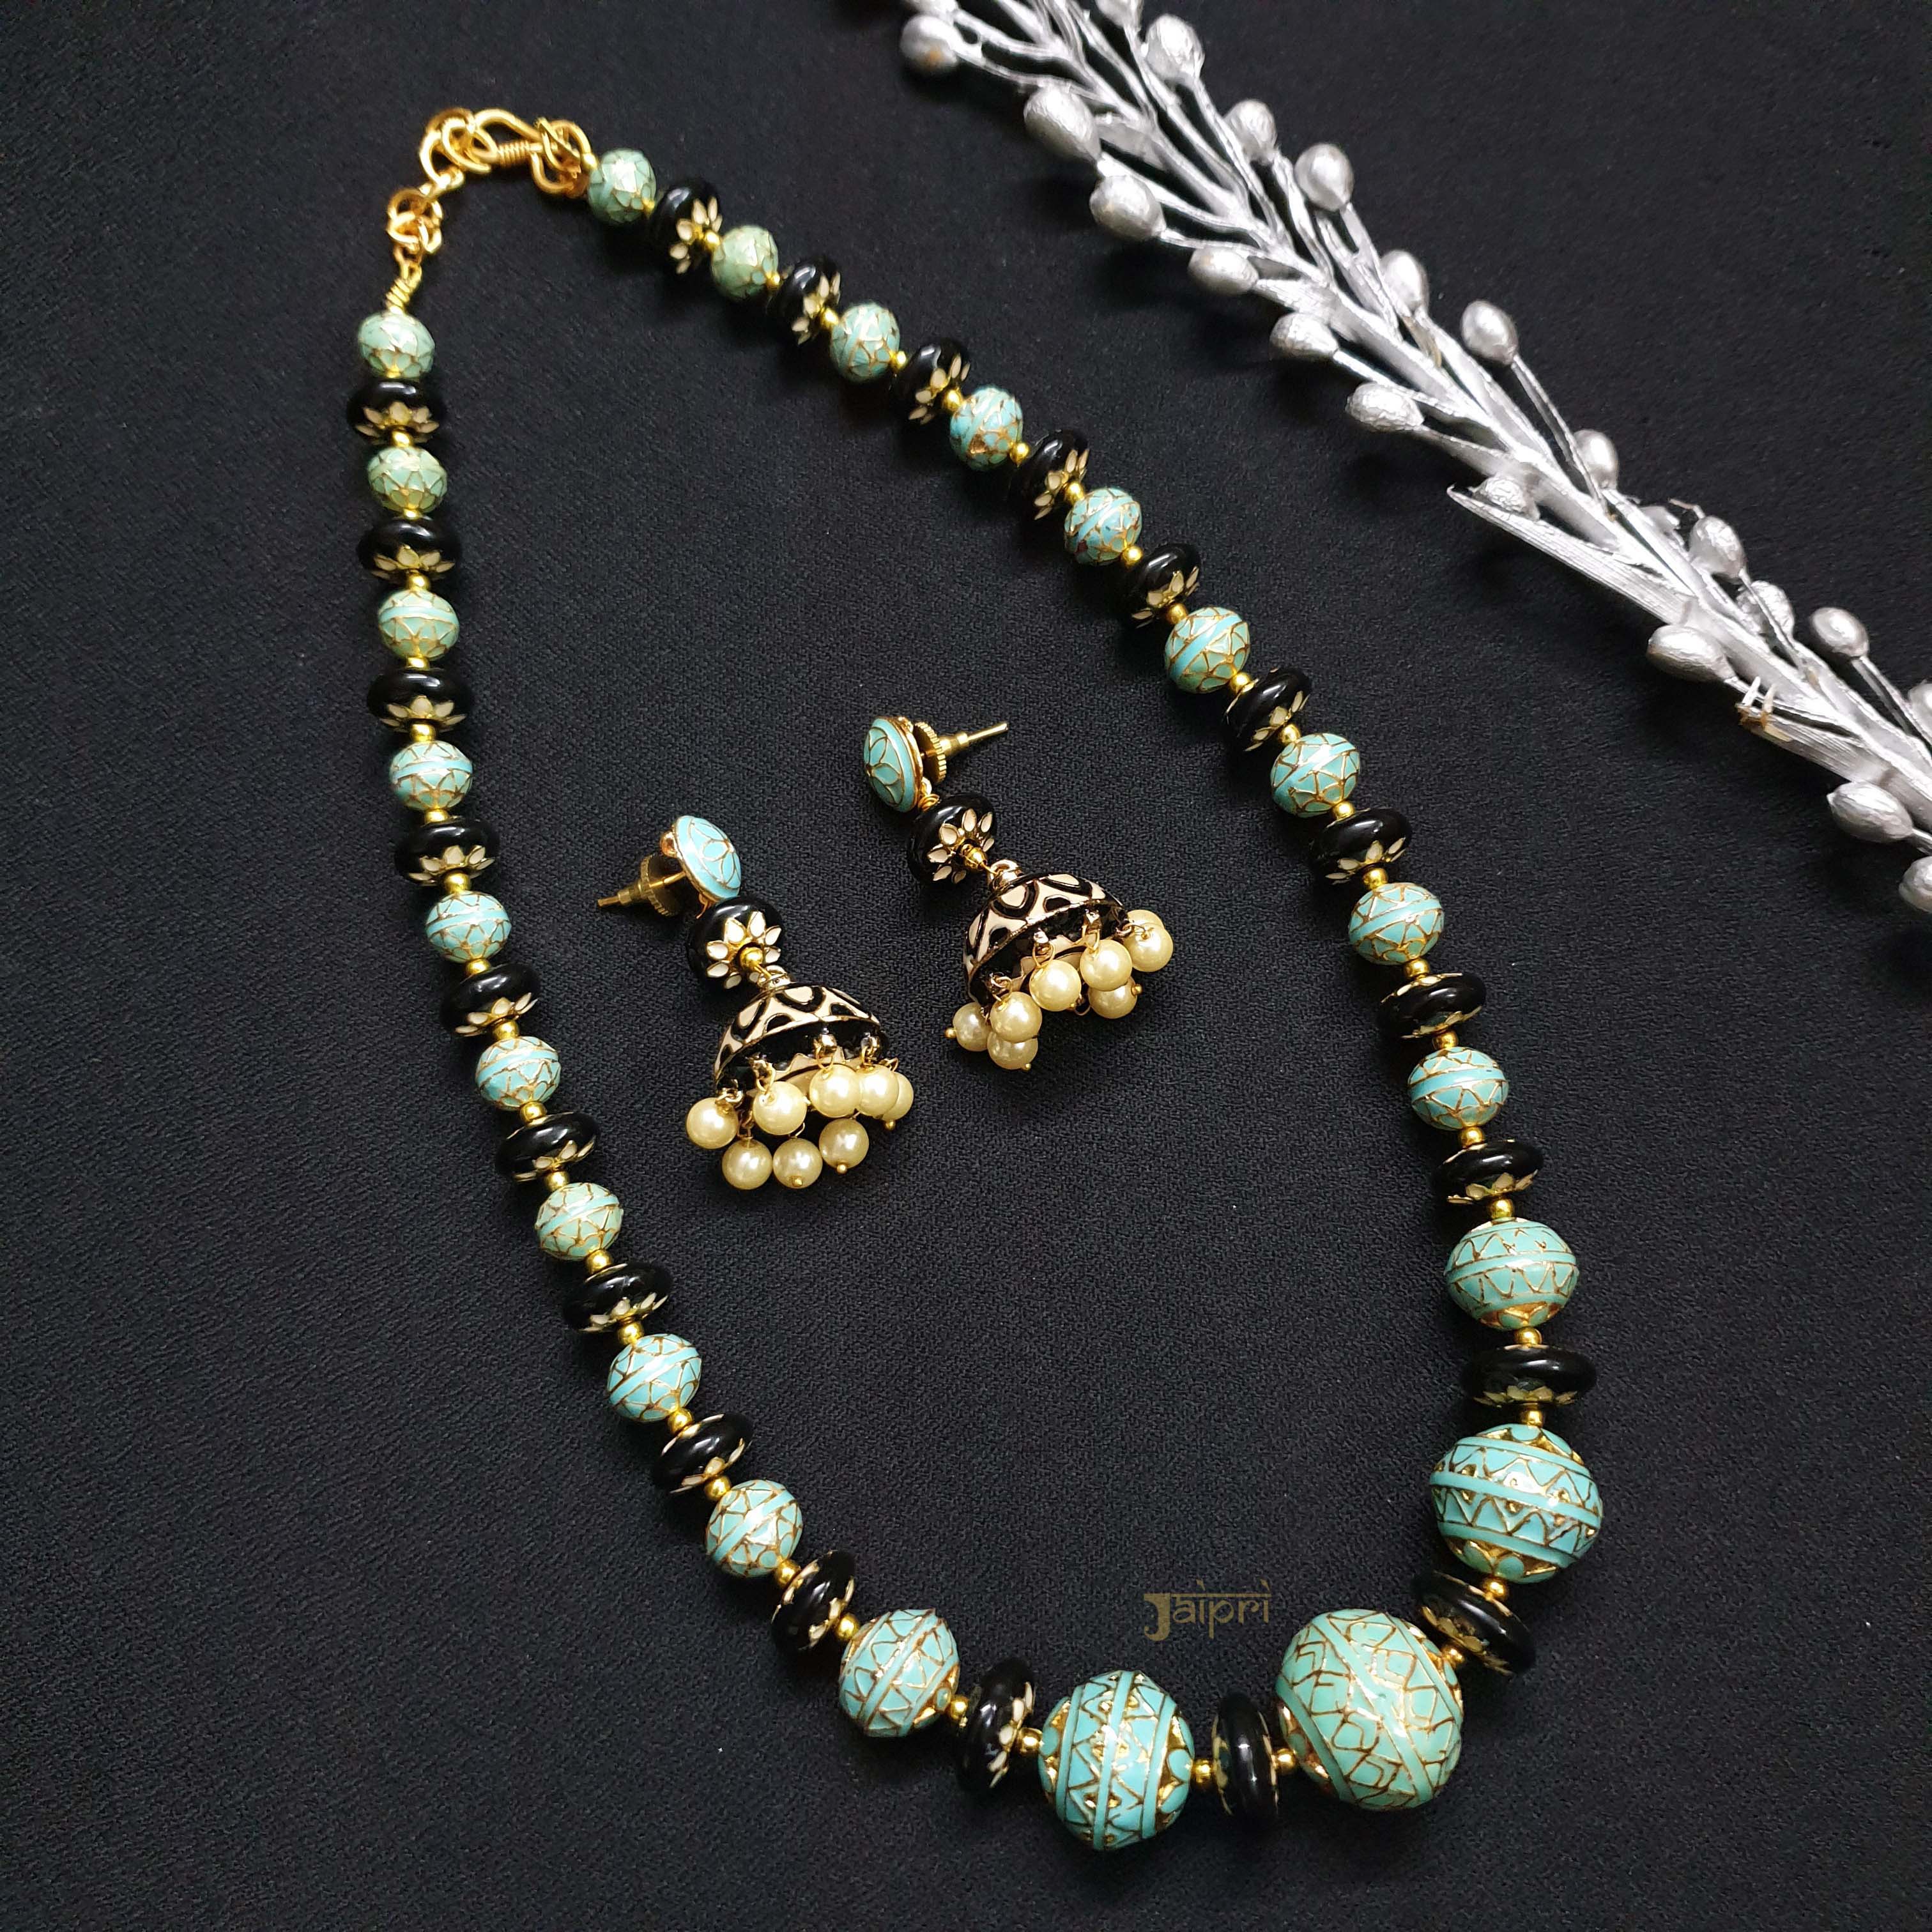 Turquoise And Black Meenakari Beads Necklace With Earrings